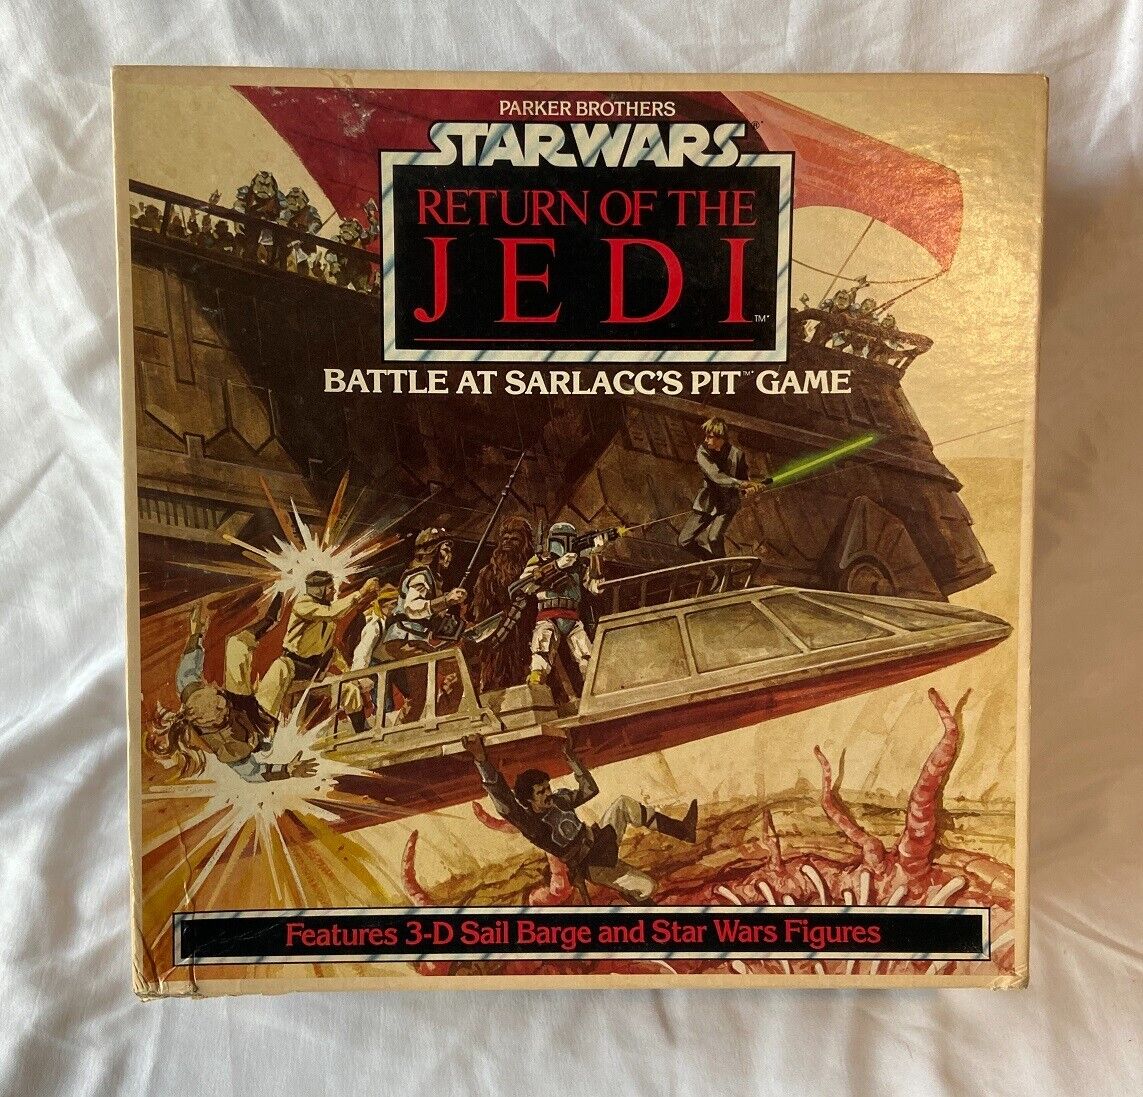 1983 Star Wars ROTJ Parker Brothers Battle at Sarlacc\'s pit game - COMPLETE